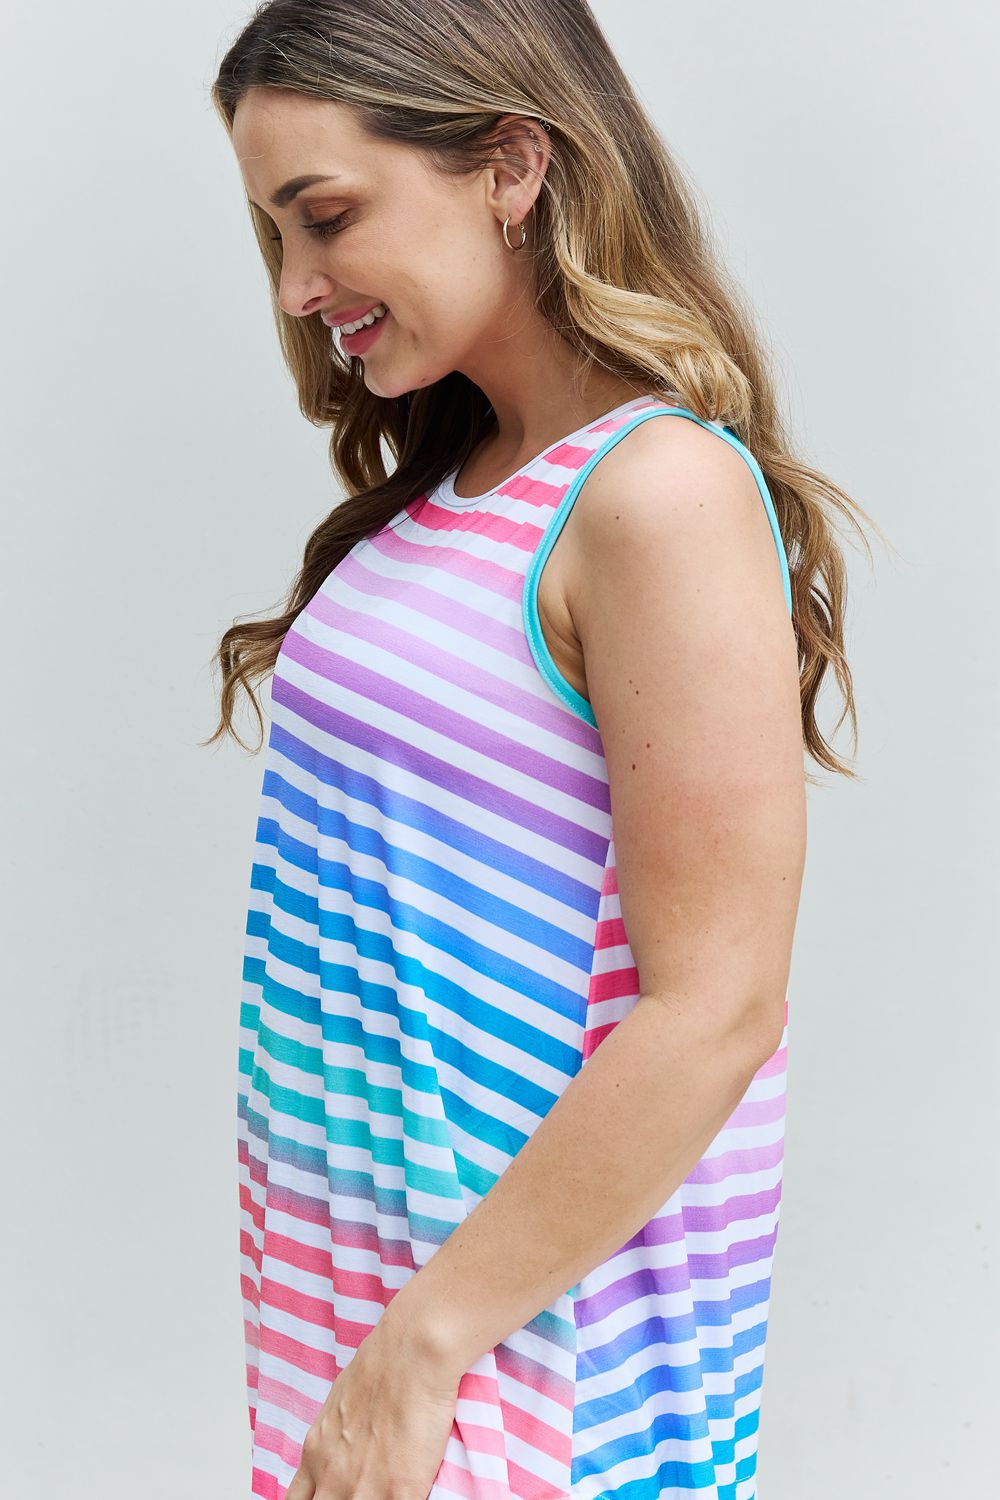 HEIMISH Love Yourself Multicolored Striped Sleeveless Top